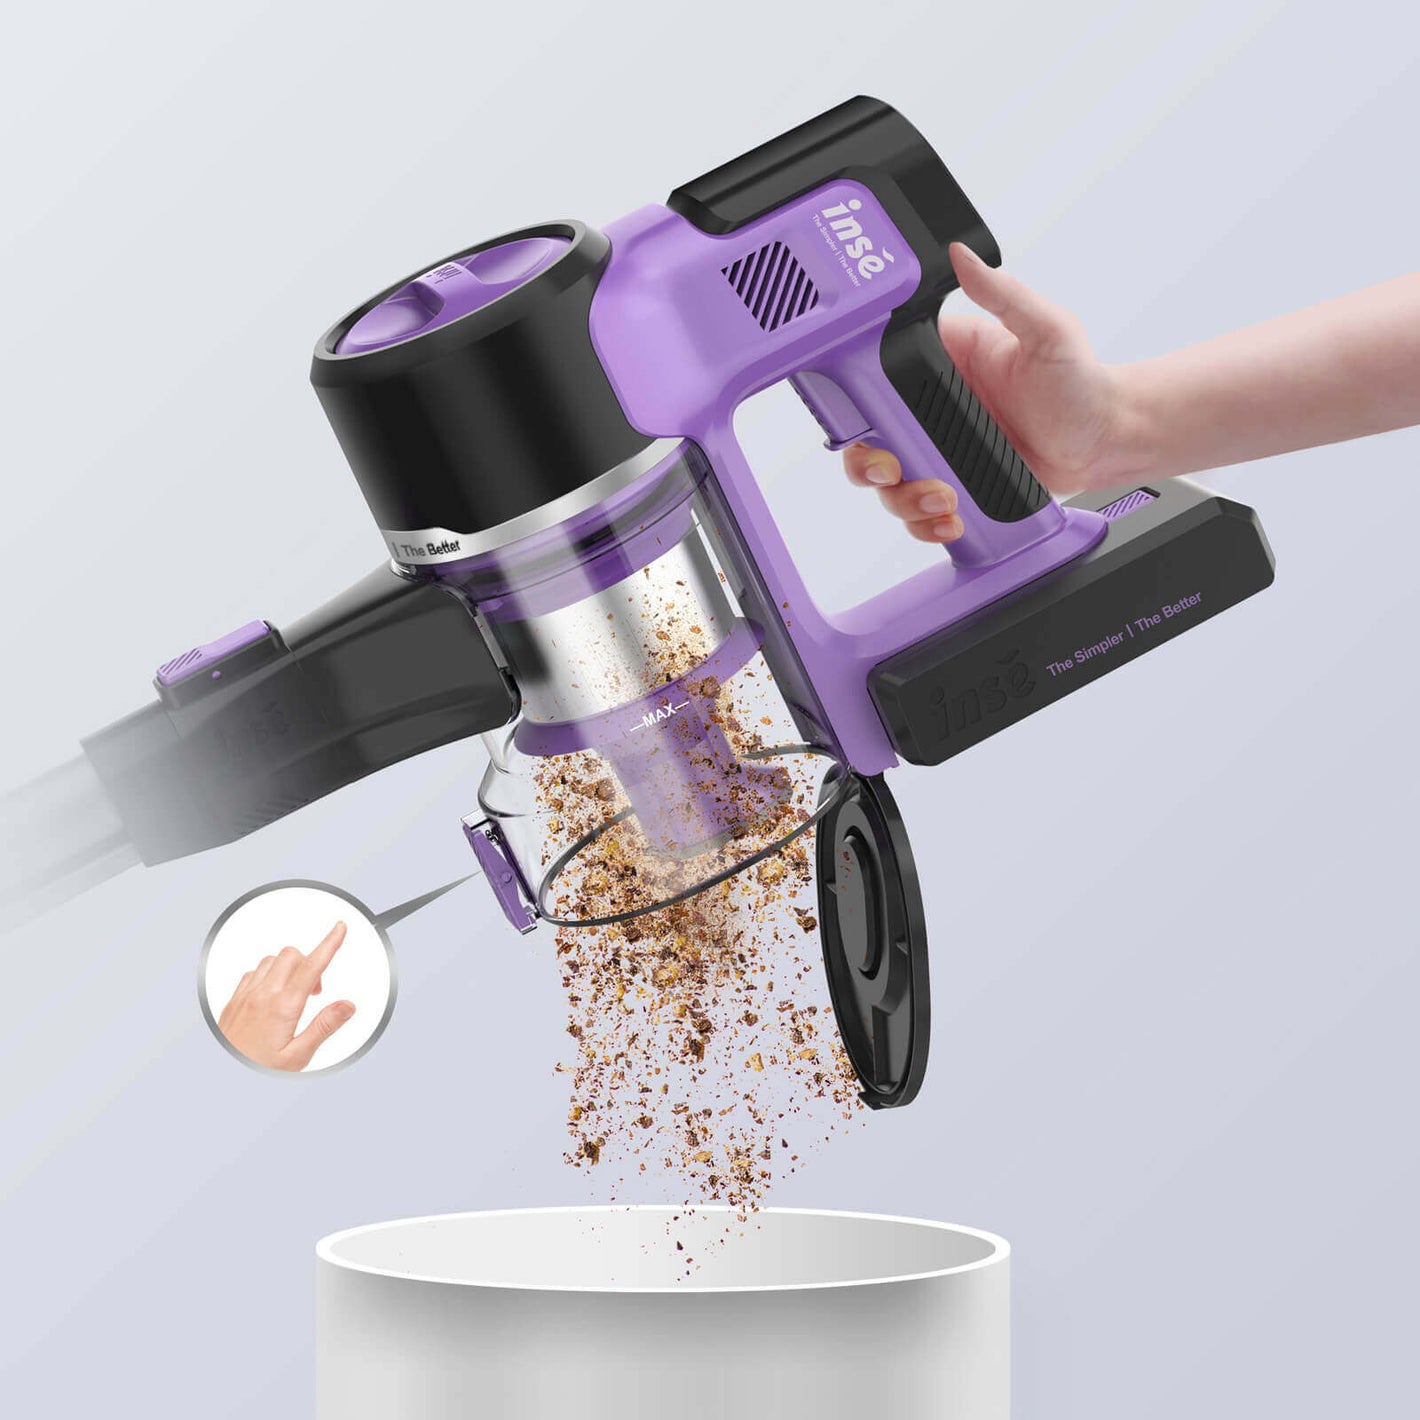 inse s10 cordless vacuum one press to easy empty-inselife.com